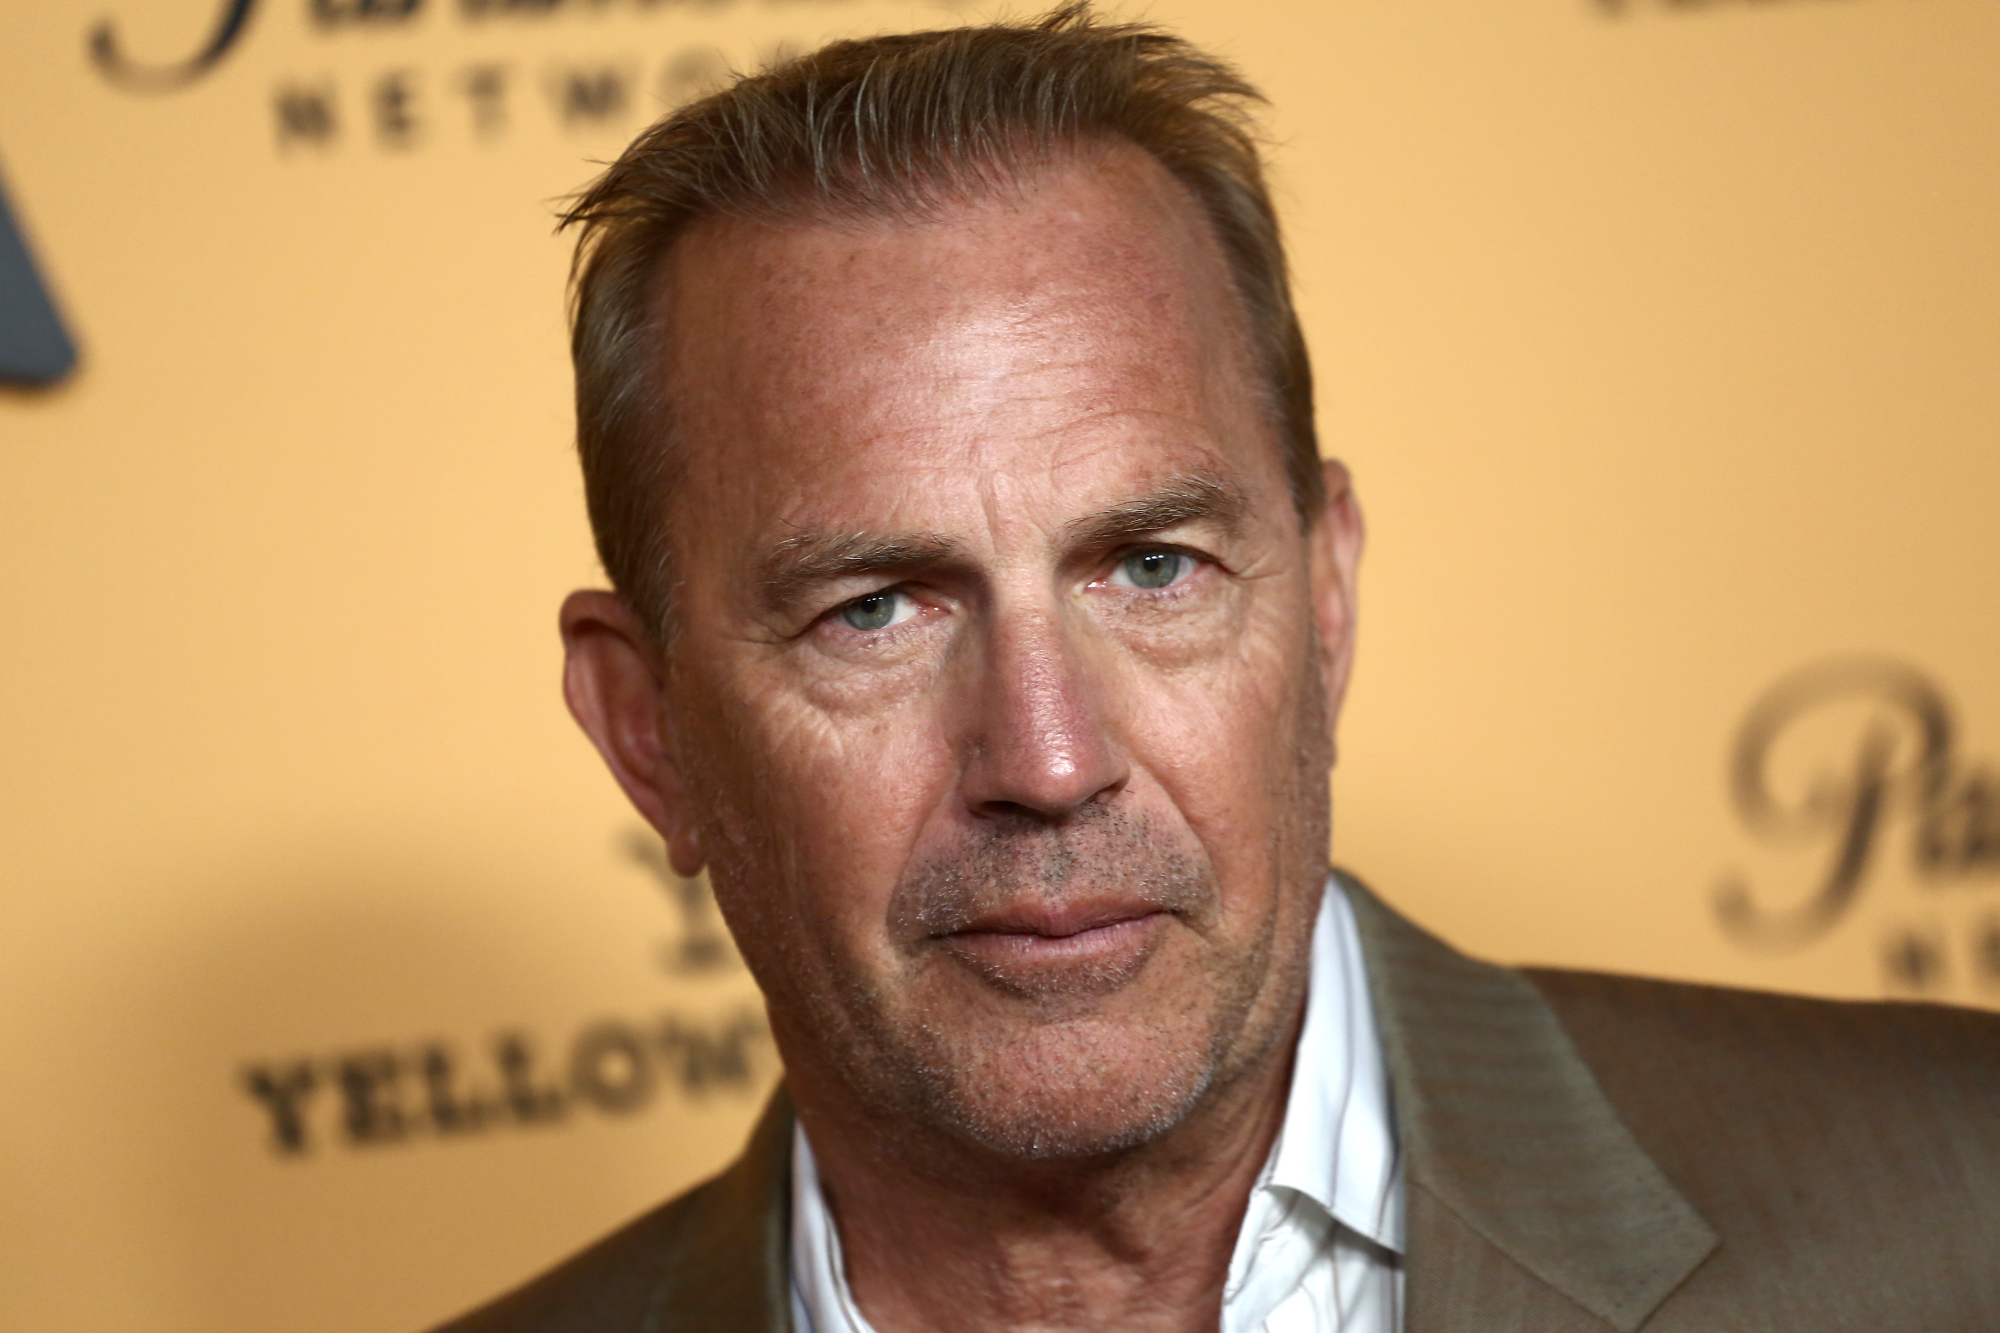 'Bull Durham' actor Kevin Costner standing in front of 'Yellowstone' step and repeat